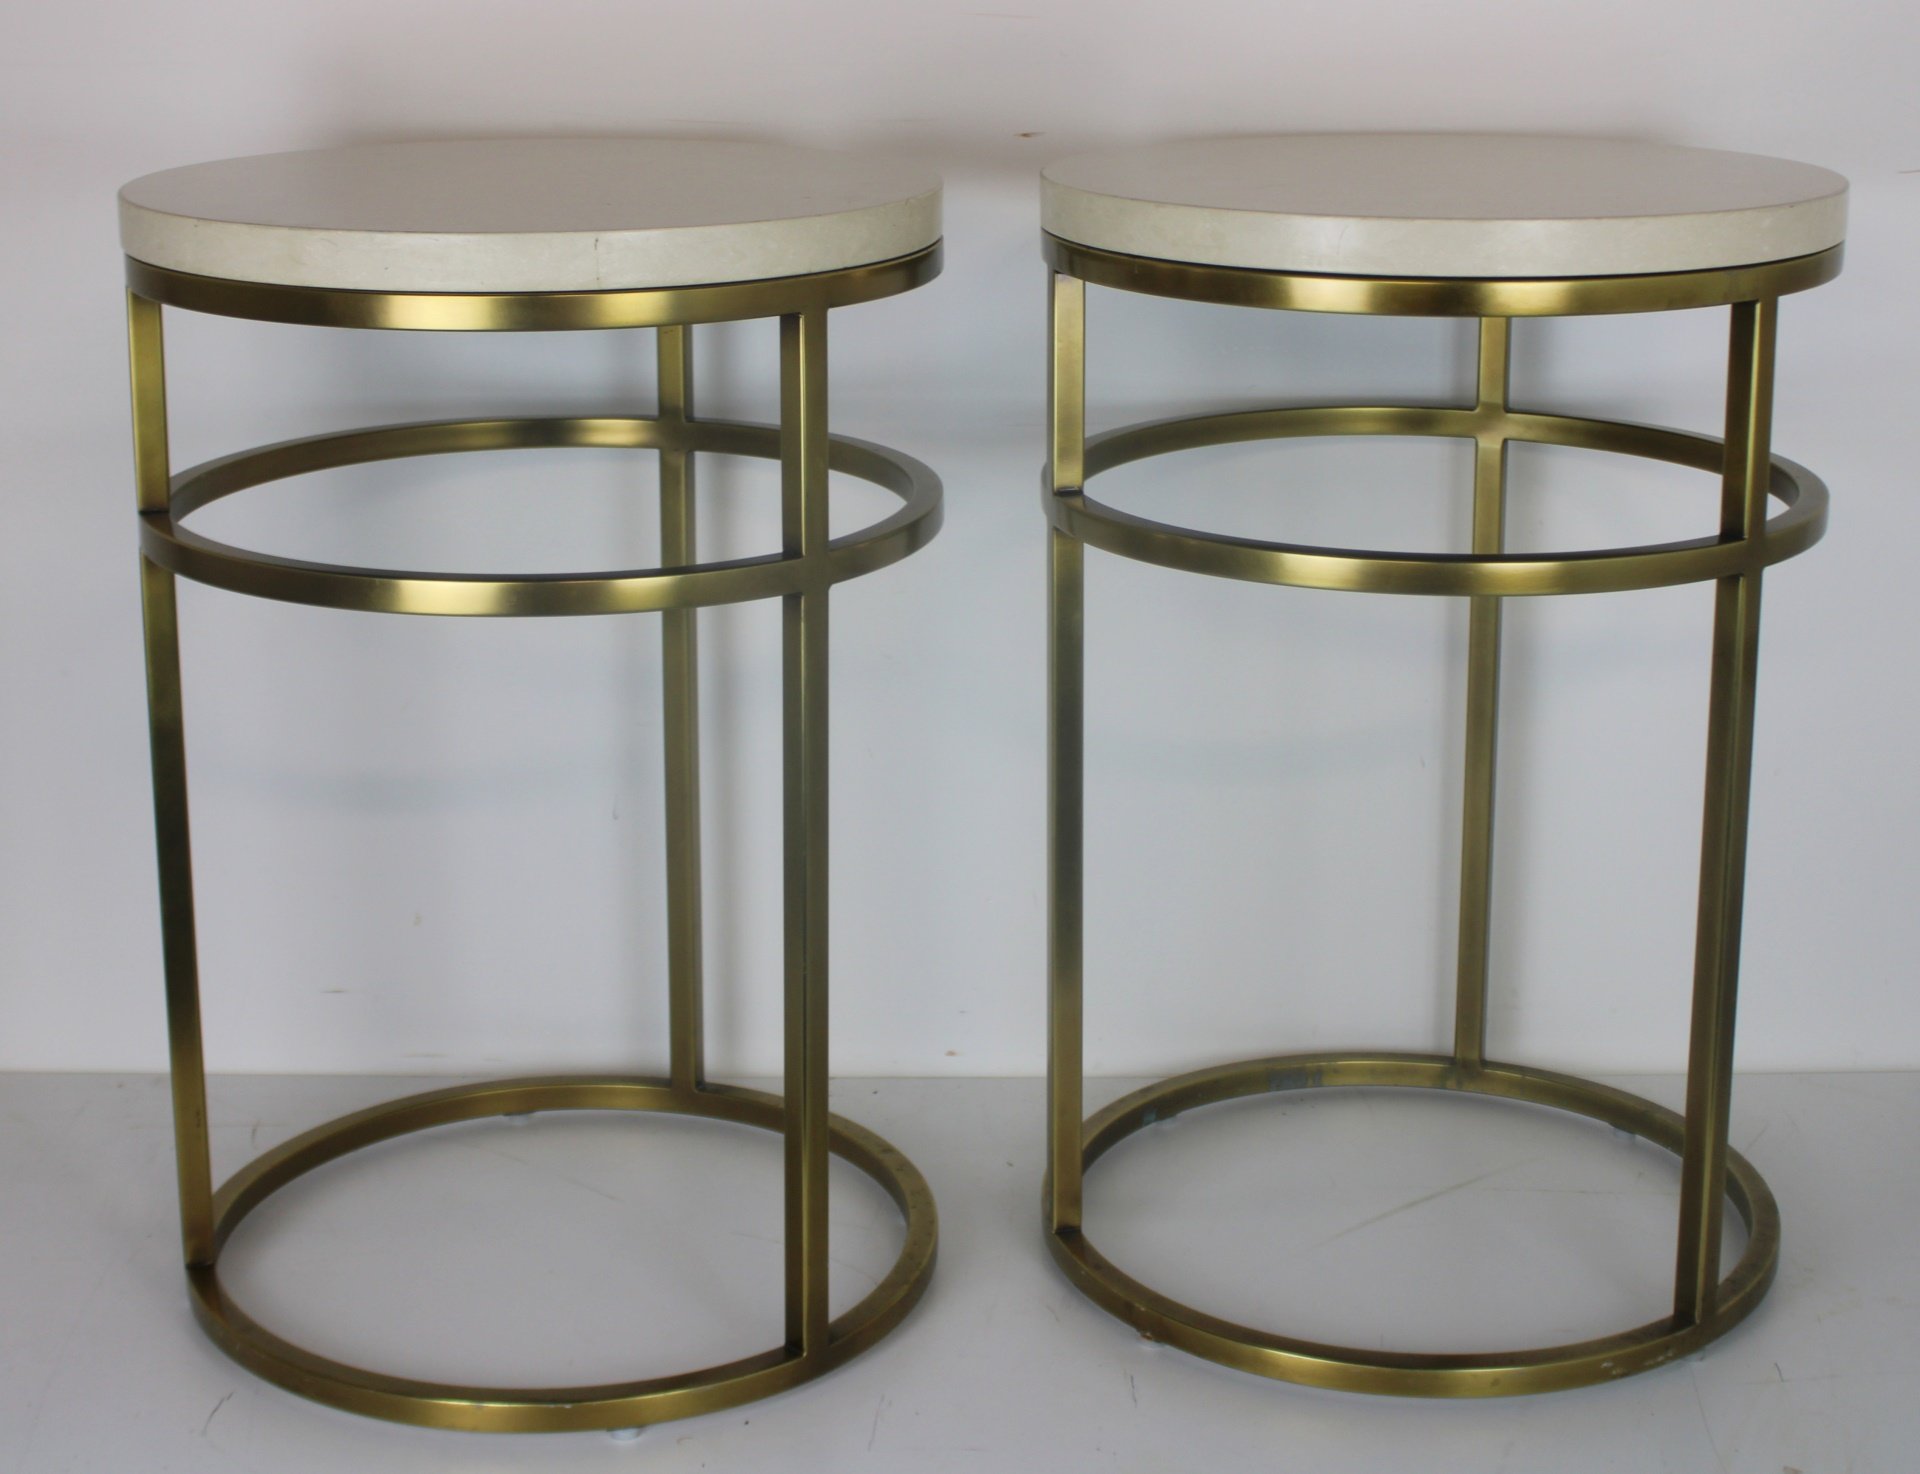 PAIR OF GILT METAL AND STONE TOP